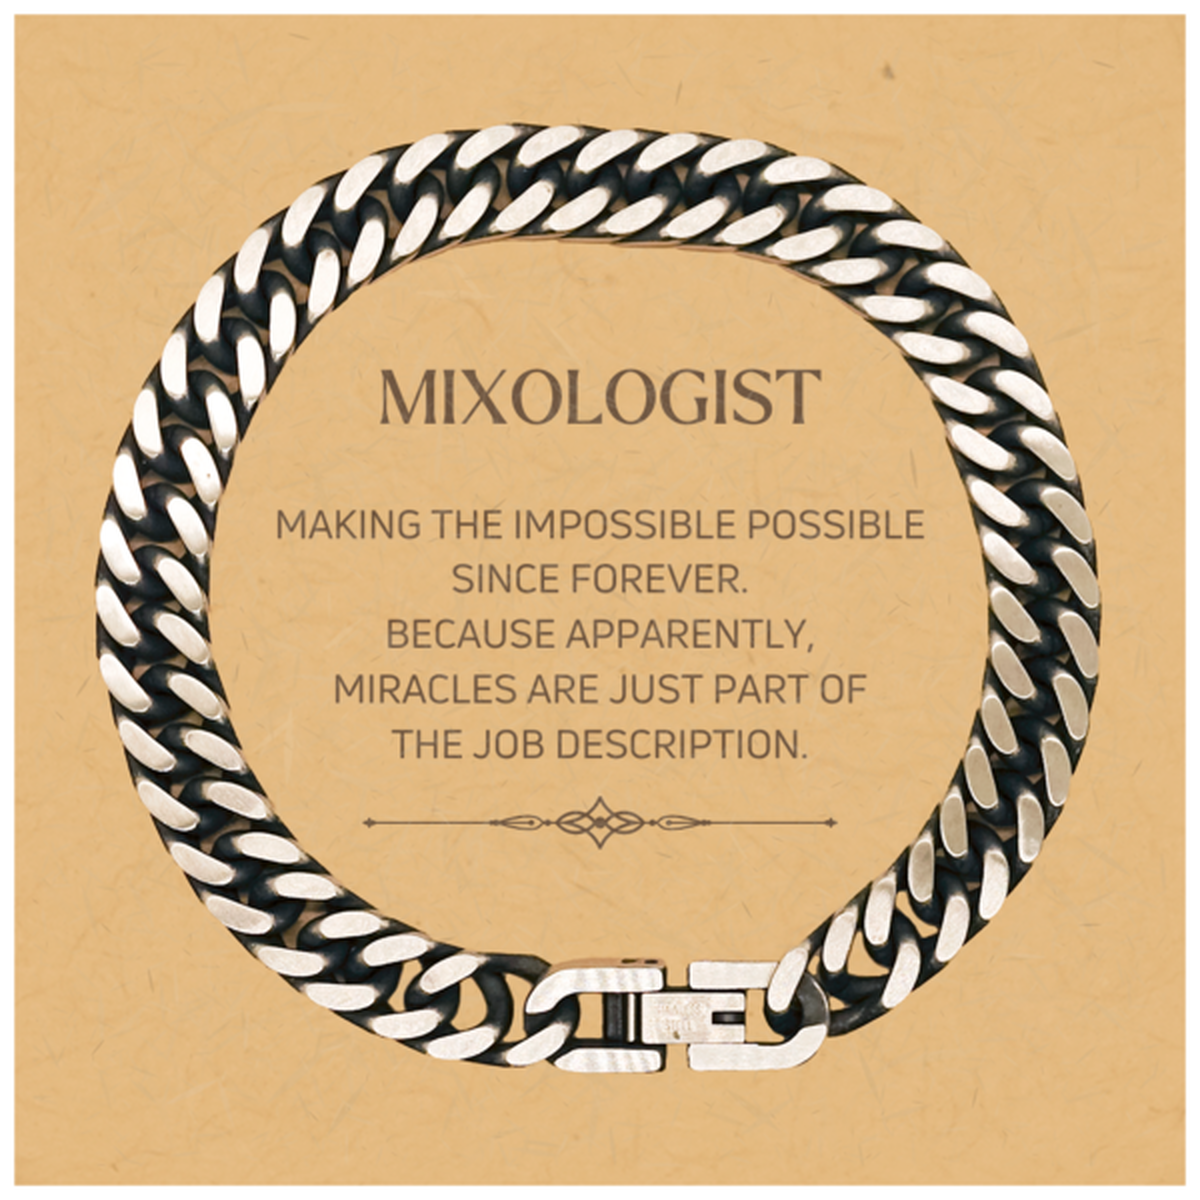 Funny Mixologist Gifts, Miracles are just part of the job description, Inspirational Birthday Christmas Cuban Link Chain Bracelet For Mixologist, Men, Women, Coworkers, Friends, Boss